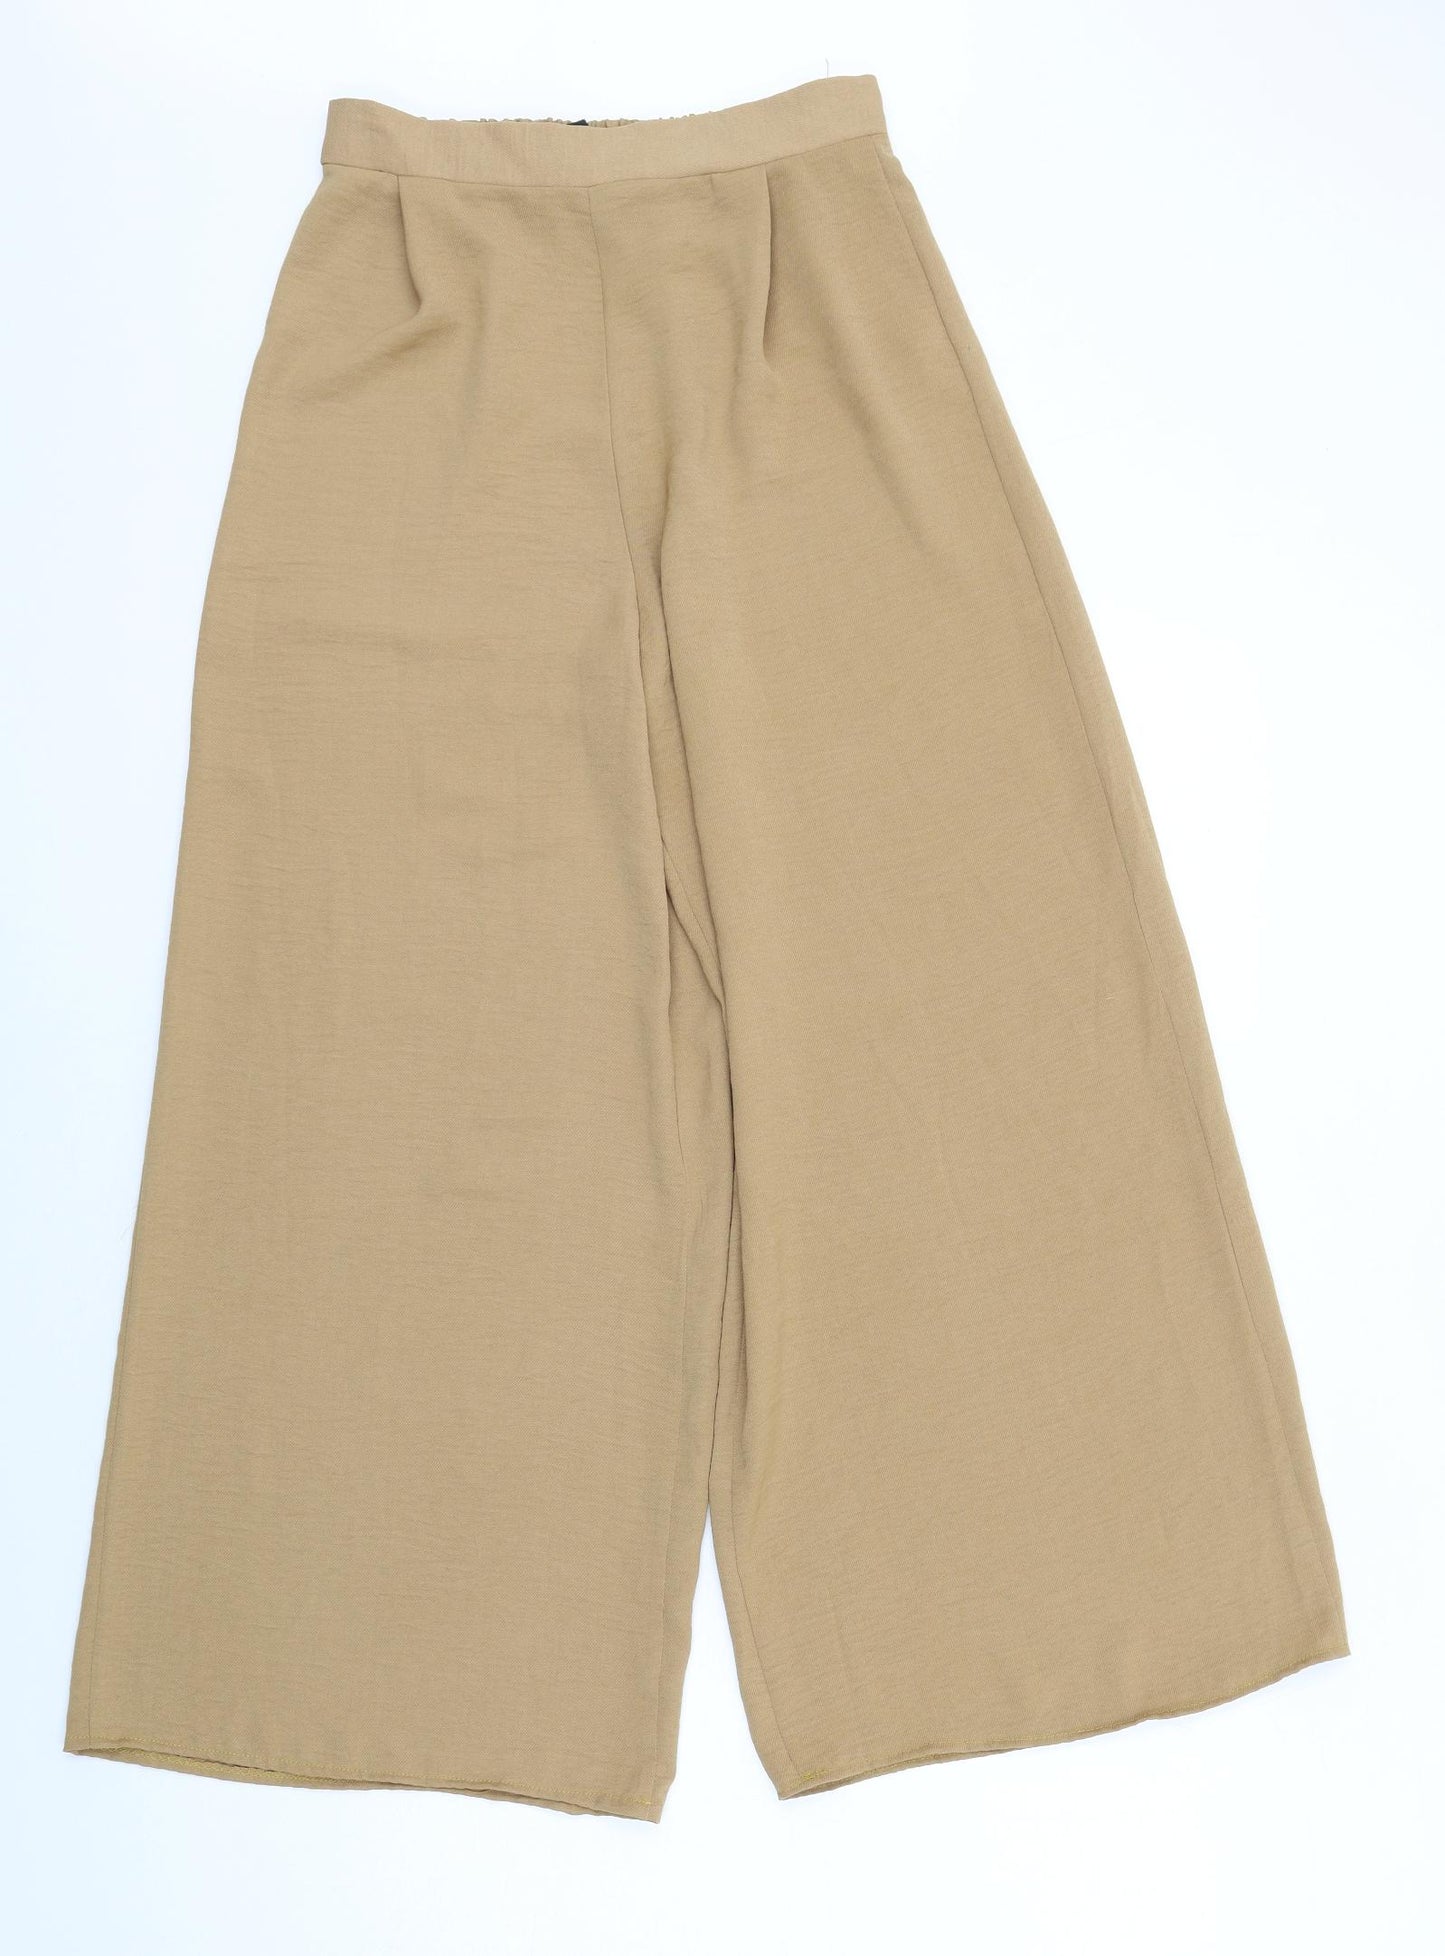 New Look Womens Beige Polyester Trousers Size 8 L28 in Regular